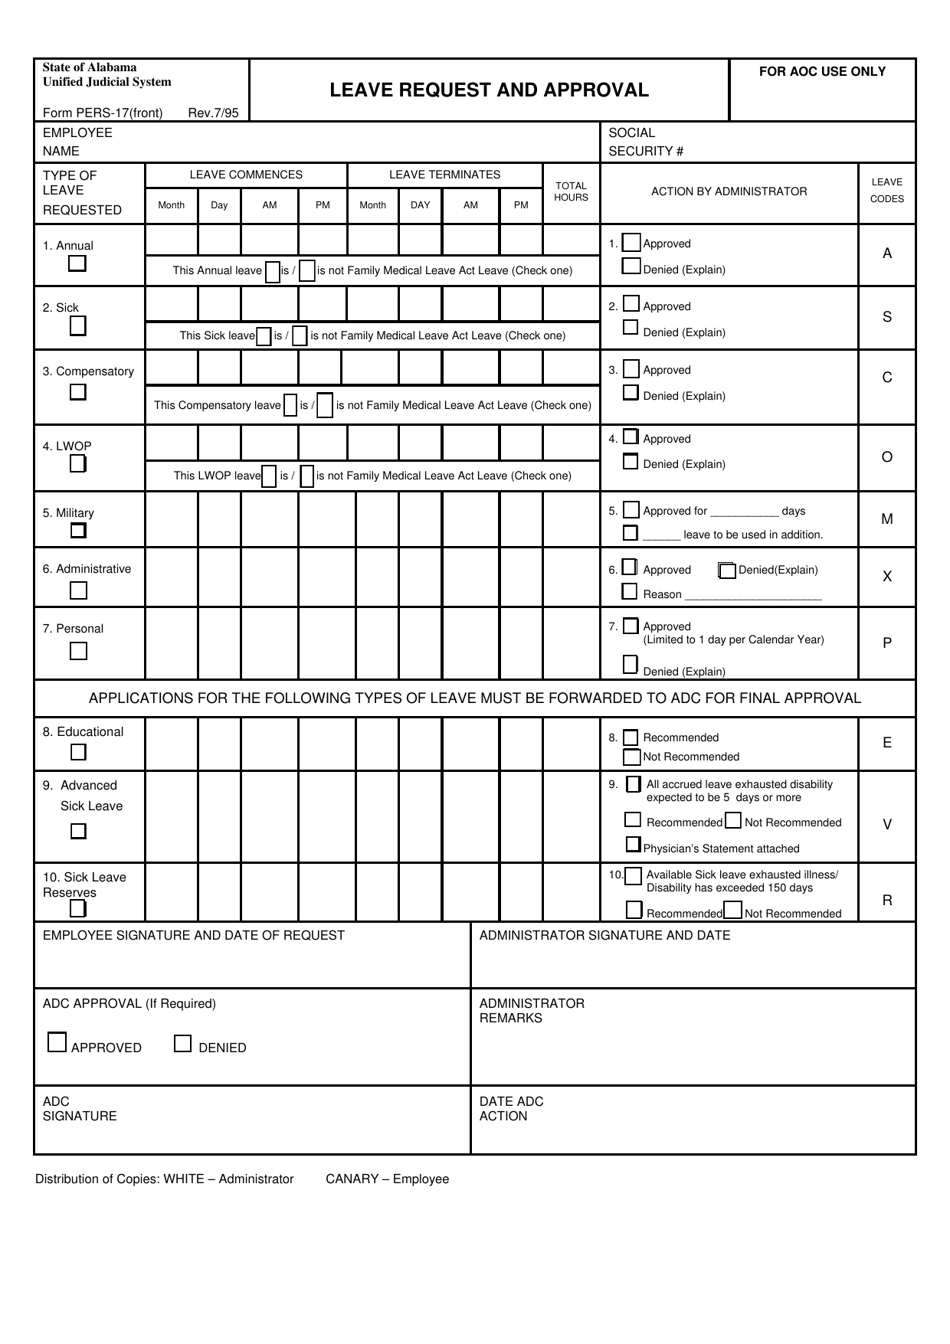 Form PERS-17 Leave Request and Approval - Alabama, Page 1